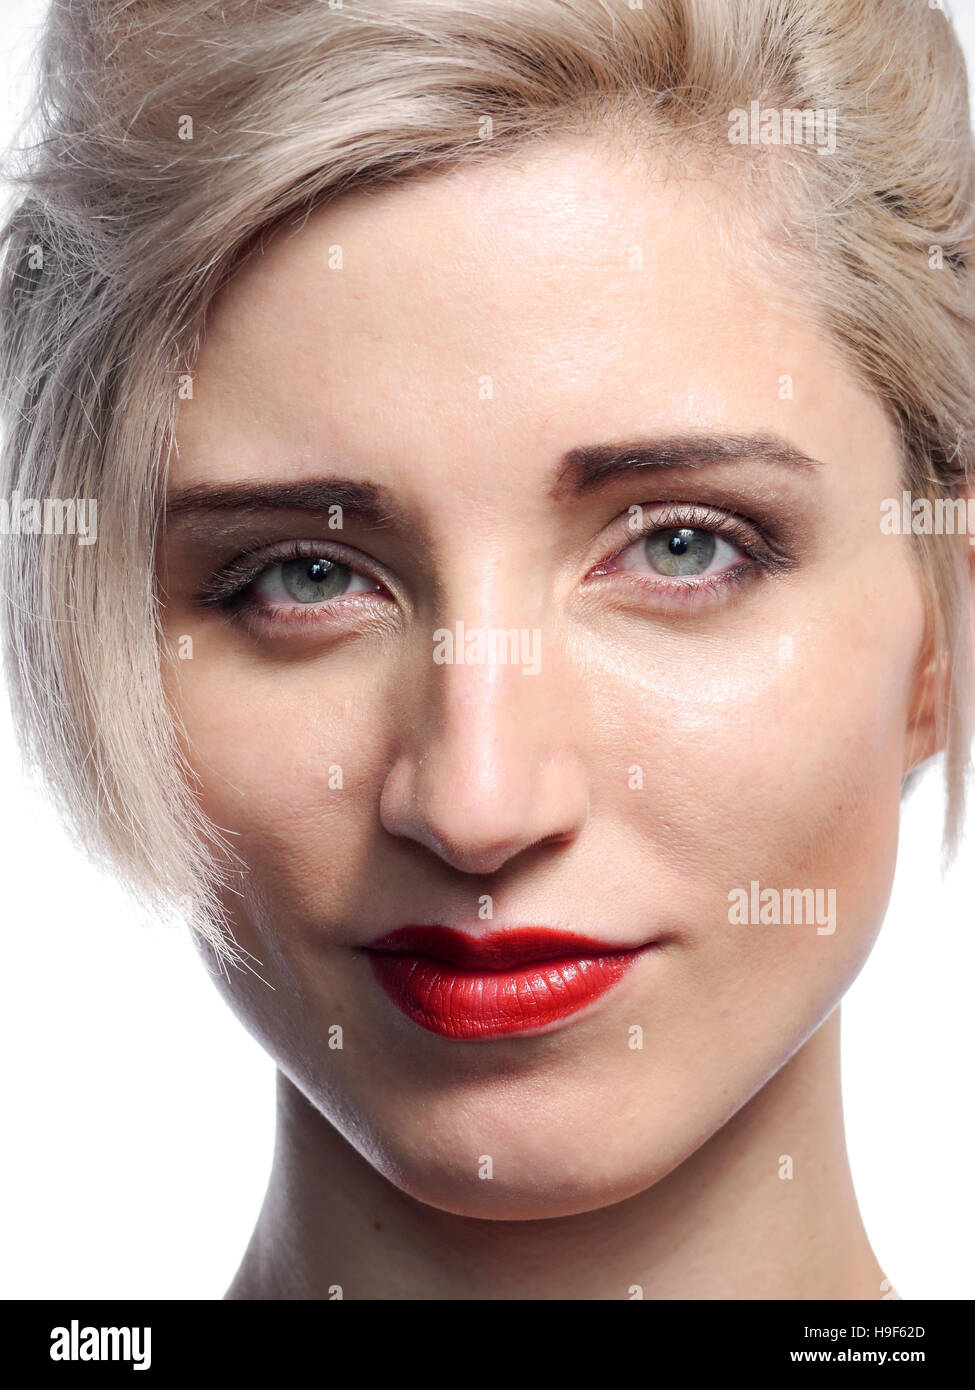 A head shot of a blond female model on a white background. Stock Photo